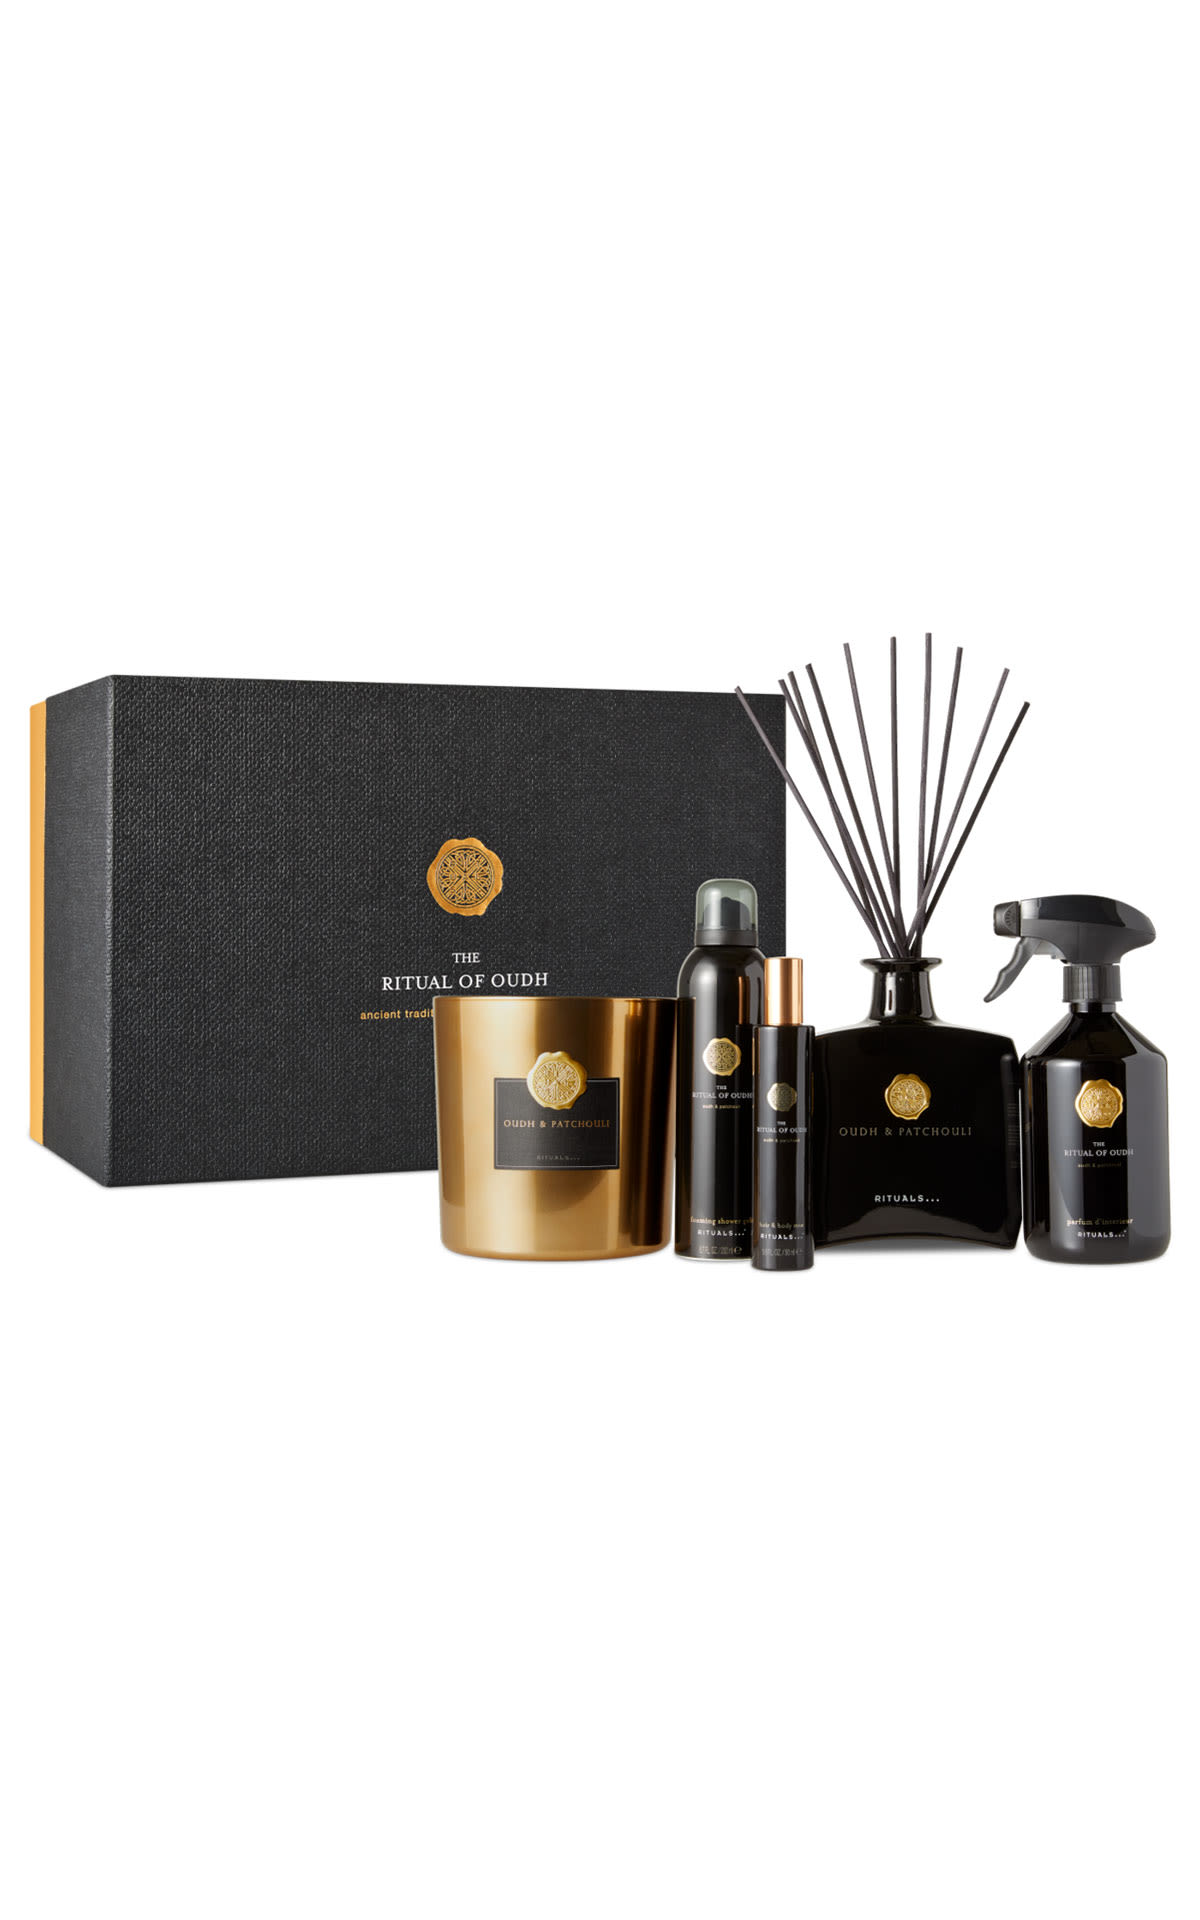 Rituals The ritual of oudh gift set 2022 from Bicester Village